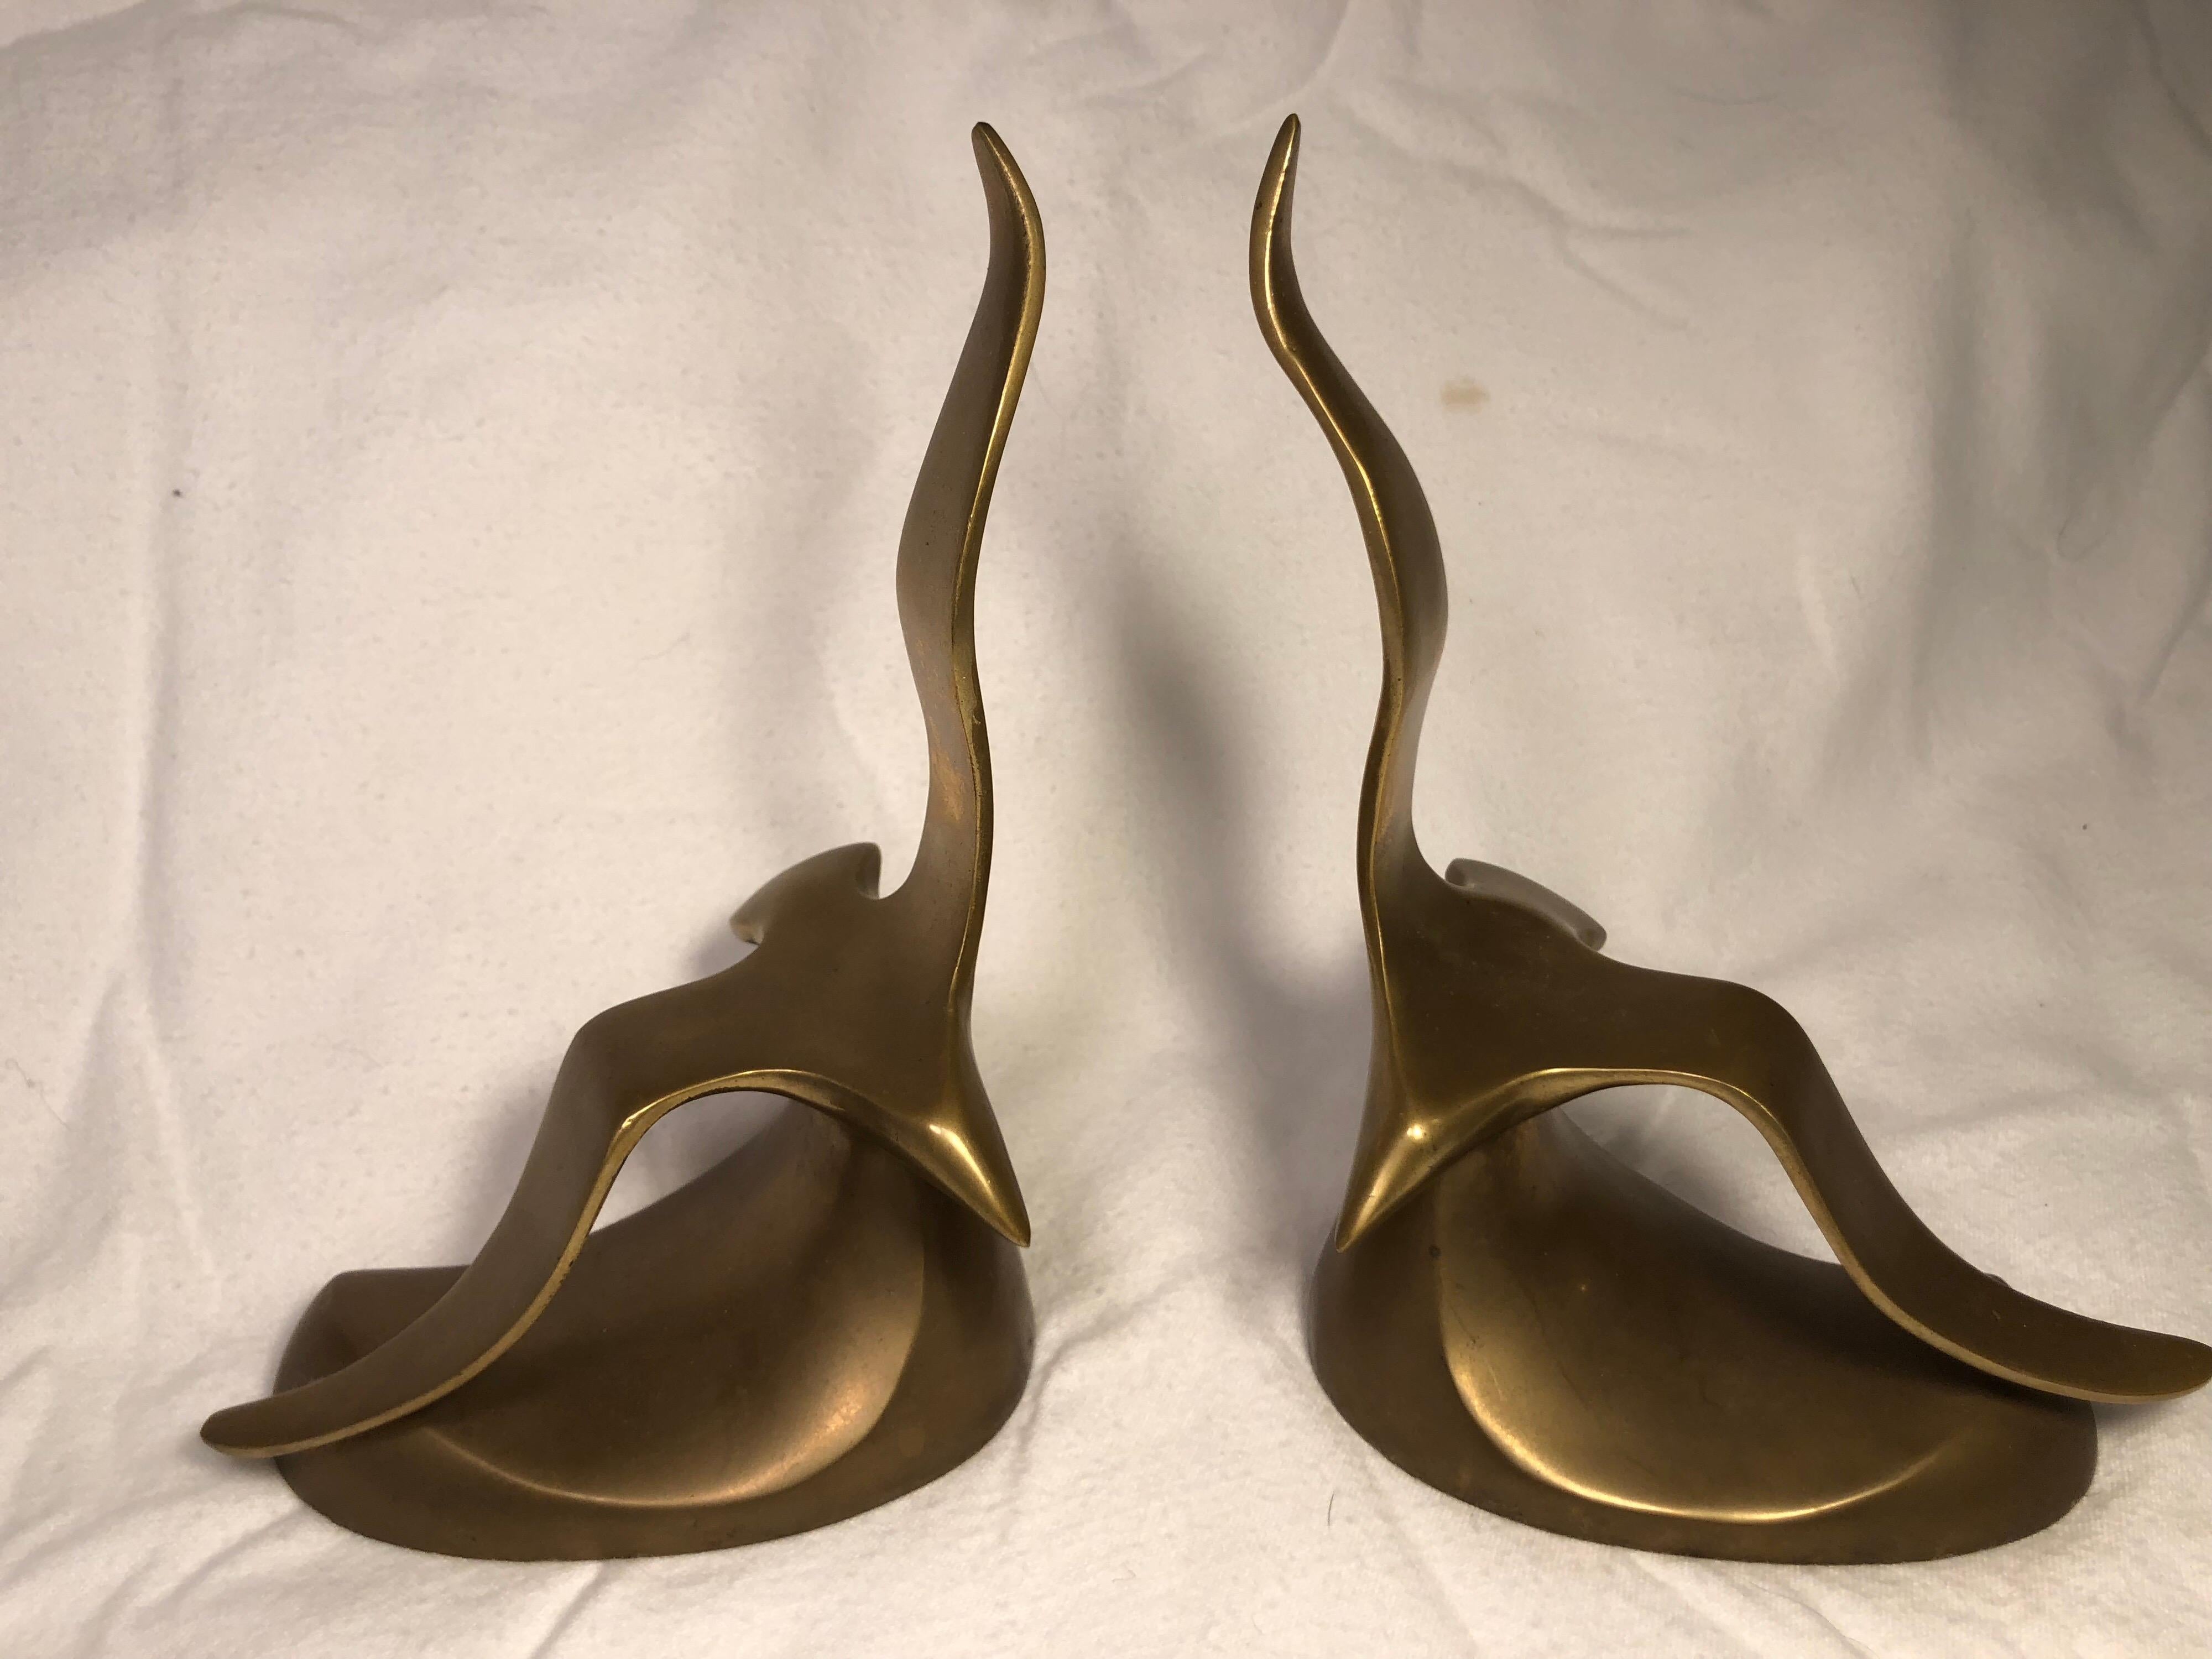 Pair of Mid-Century Modern brass seagull bookends. Perhaps these were based on the very popular novel, 